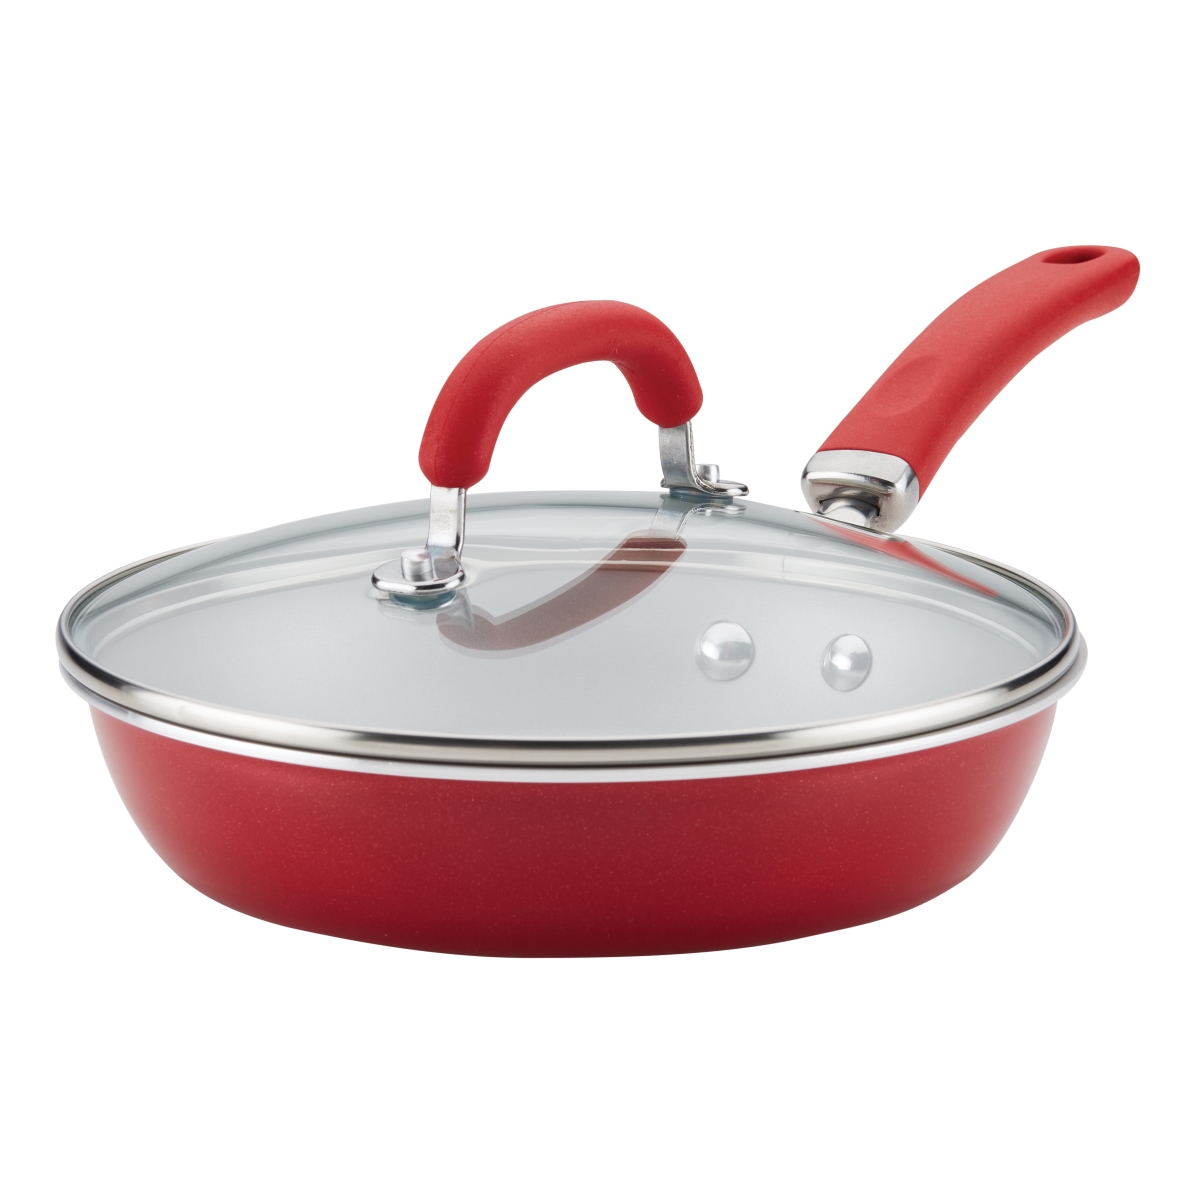 Picture of Rachael Ray 11999 Create Delicious Aluminum Nonstick Covered Deep Skillet, 9.5 in. - Red Shimmer